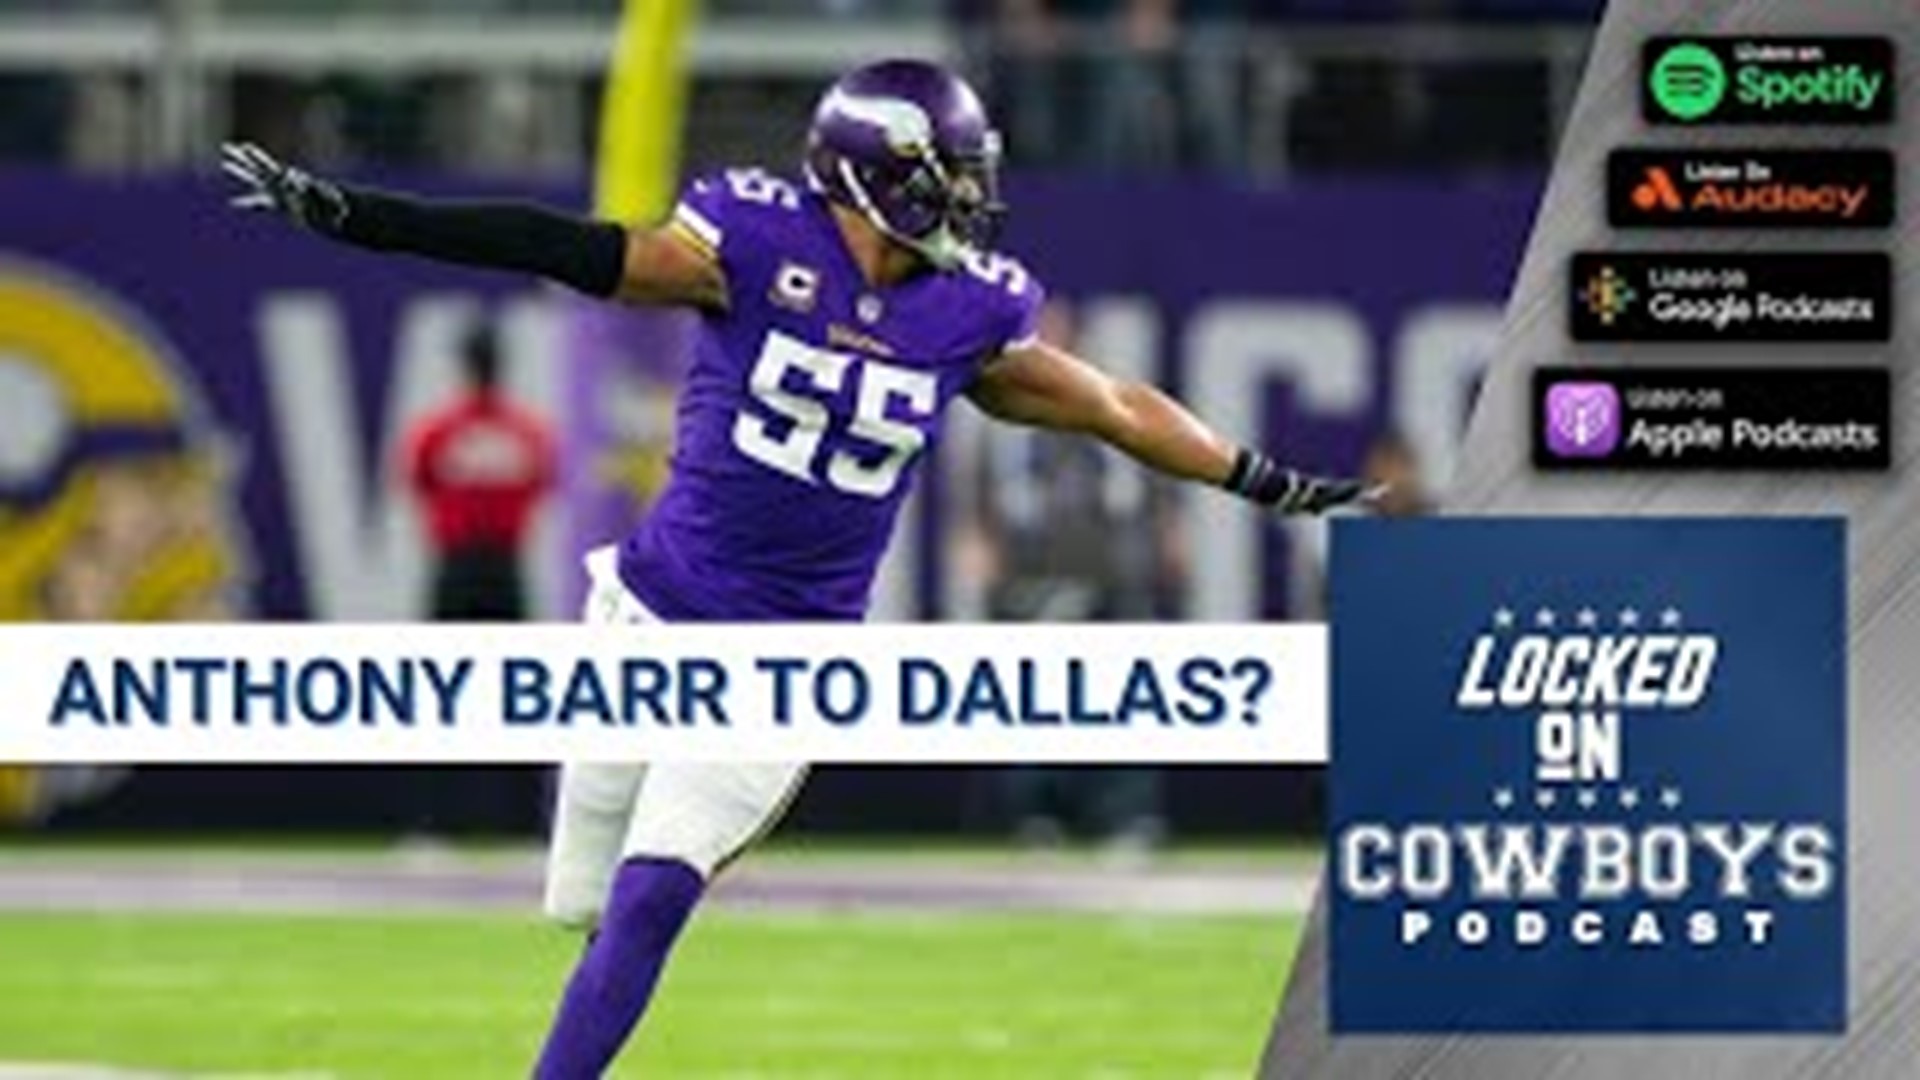 Marcus Mosher and Landon McCool of Locked On Cowboys answer your Twitter questions including should the Cowboys sign linebacker Anthony Barr?